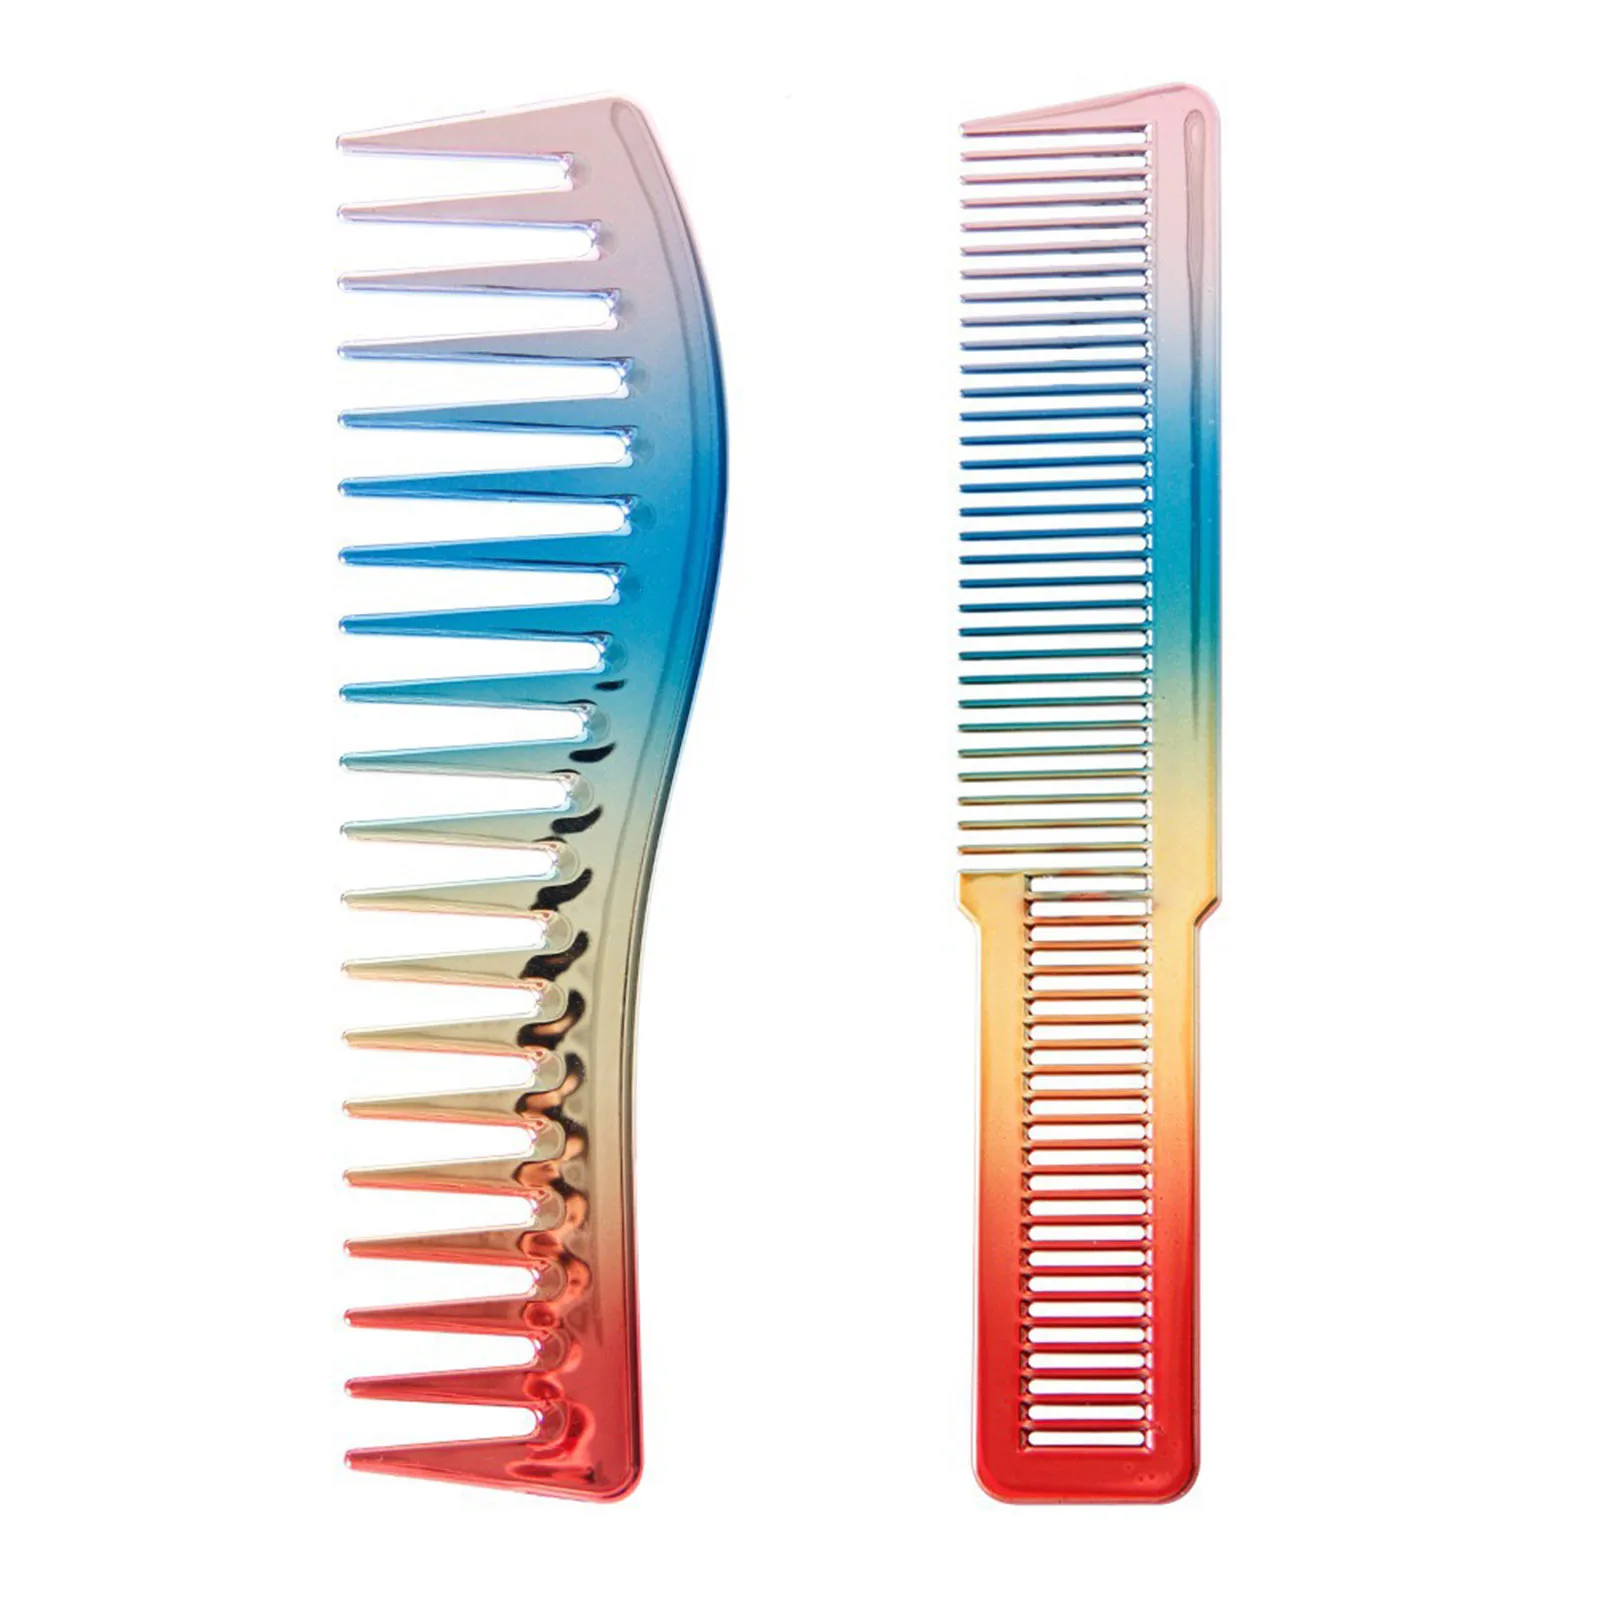 

2pcs Barber Cutting Fine Wide Tooth Hair Dressing Comb For Various Styling Hair Electroplating Rainbow Anti-Static Cutting Comb